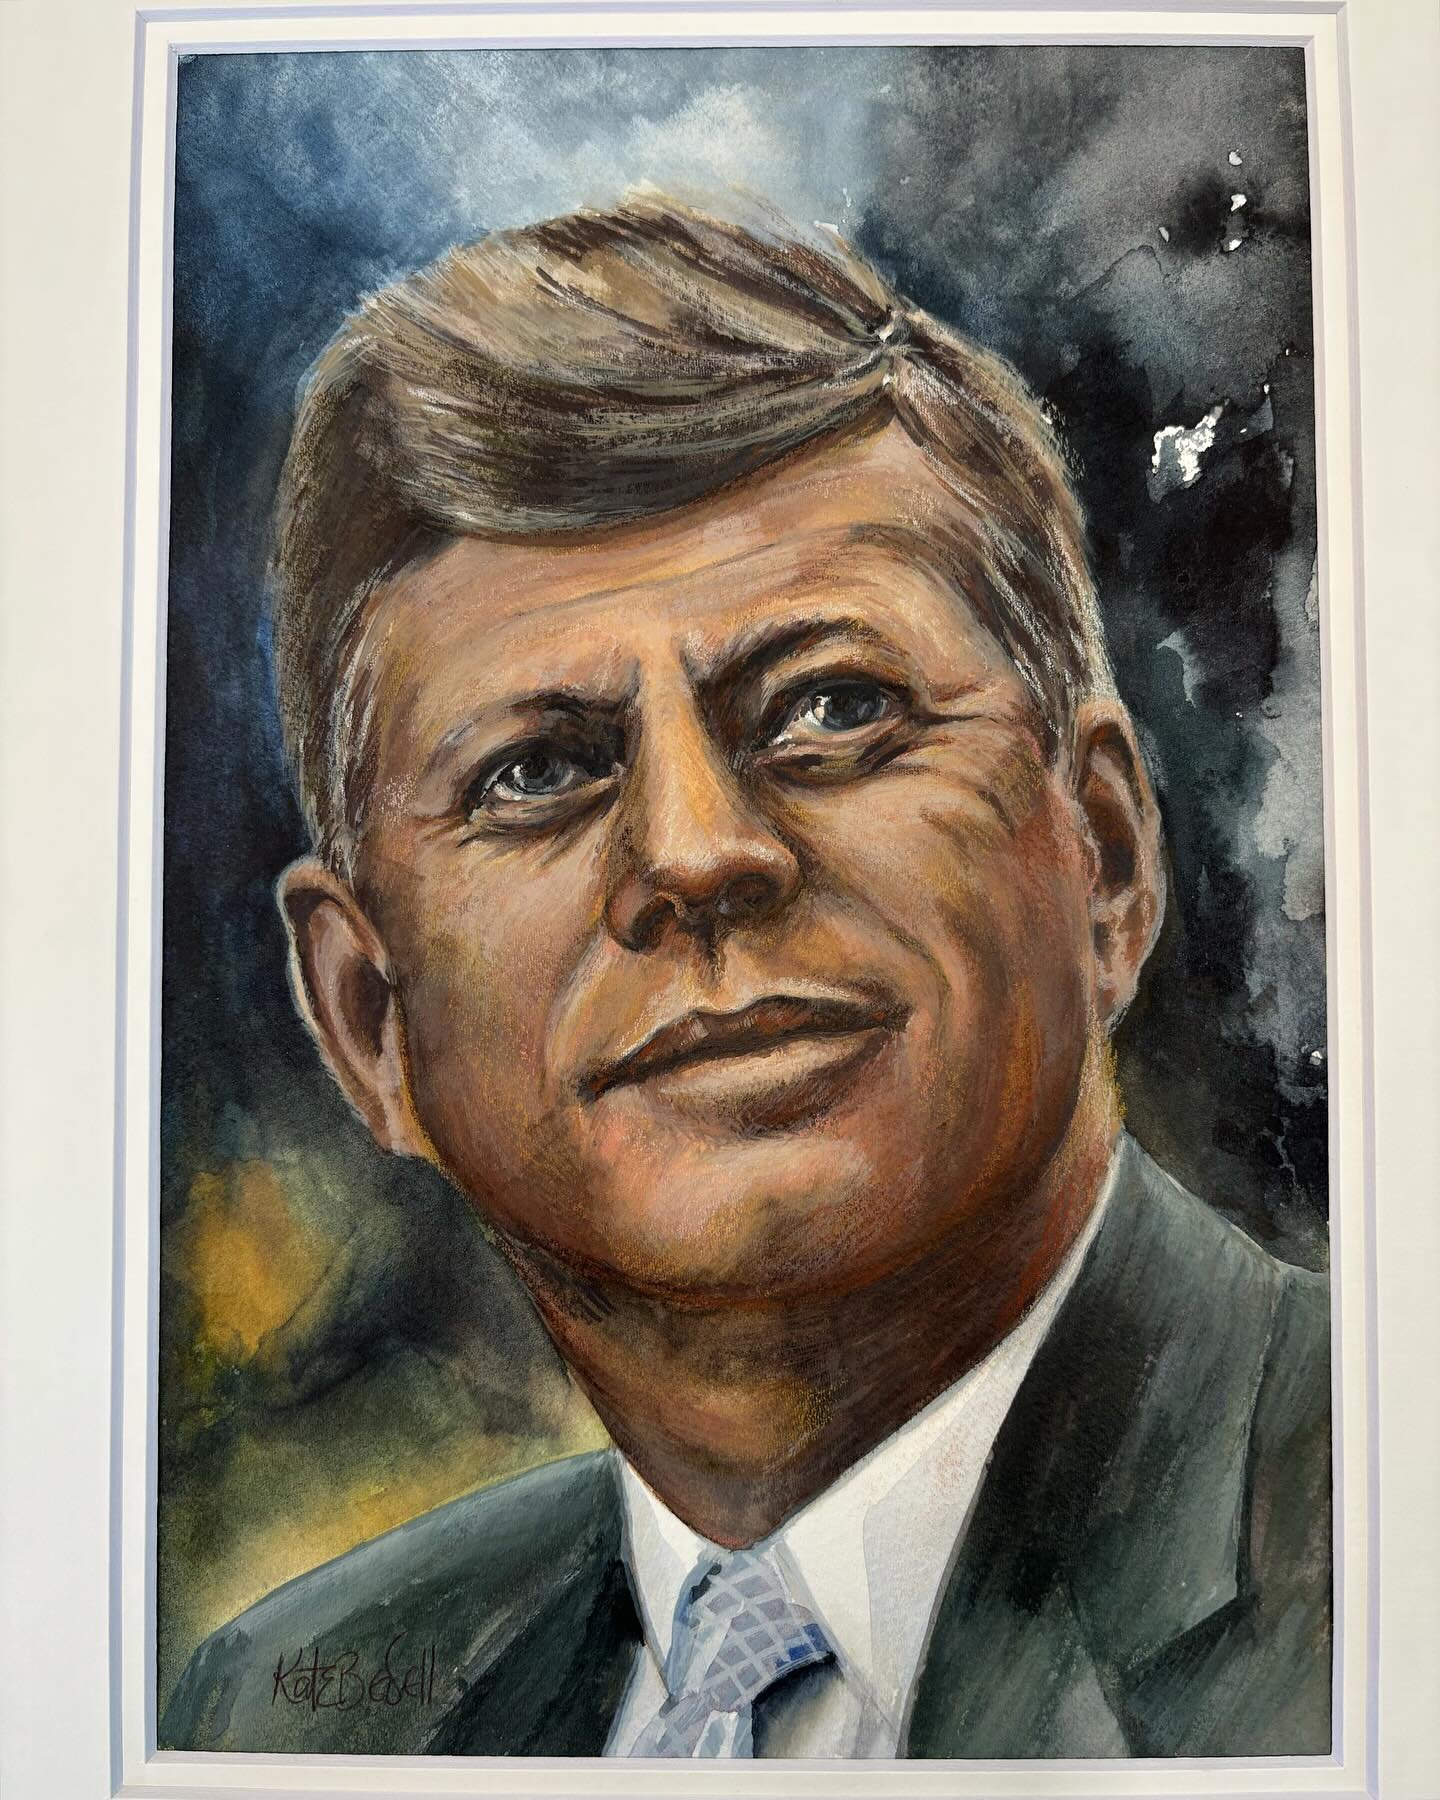 Not my usual subject matter, nor style. This portrait of JFK was a commission. It started with a watercolour base, then I built up the layers with gouache and #Derwent drawing pencils which have a soft waxy finish. @derwentartireland 

#JFK #portrait